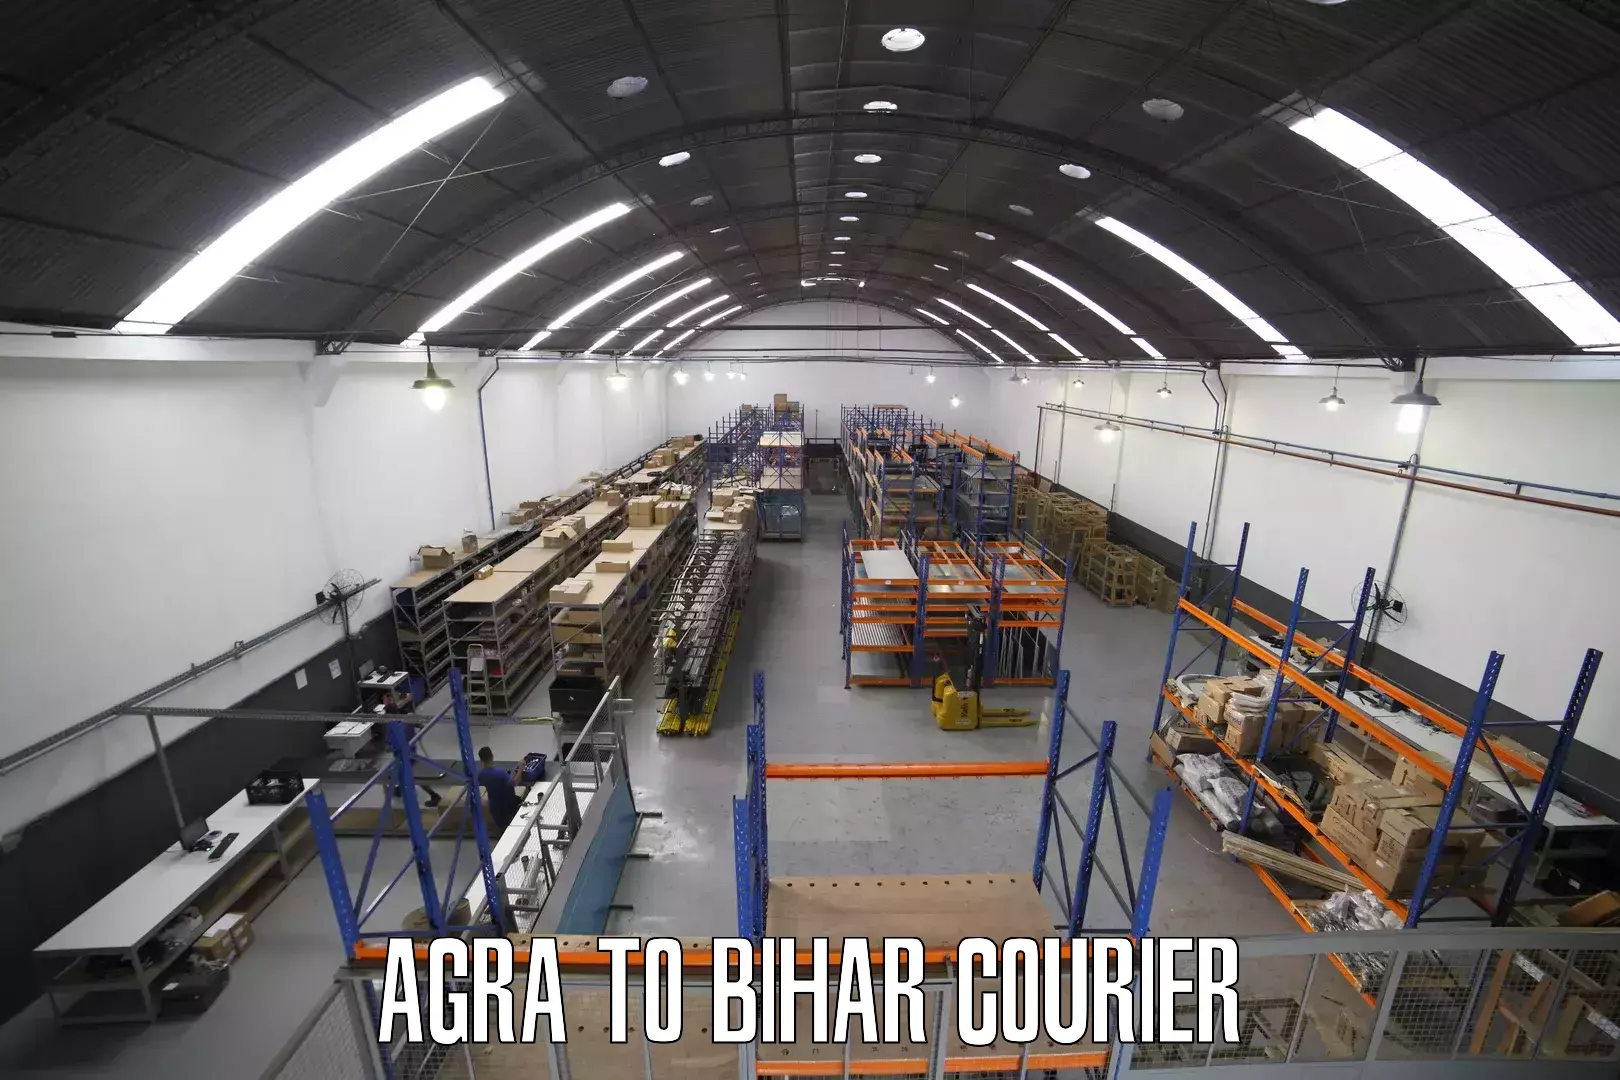 Courier service partnerships Agra to Bhorey